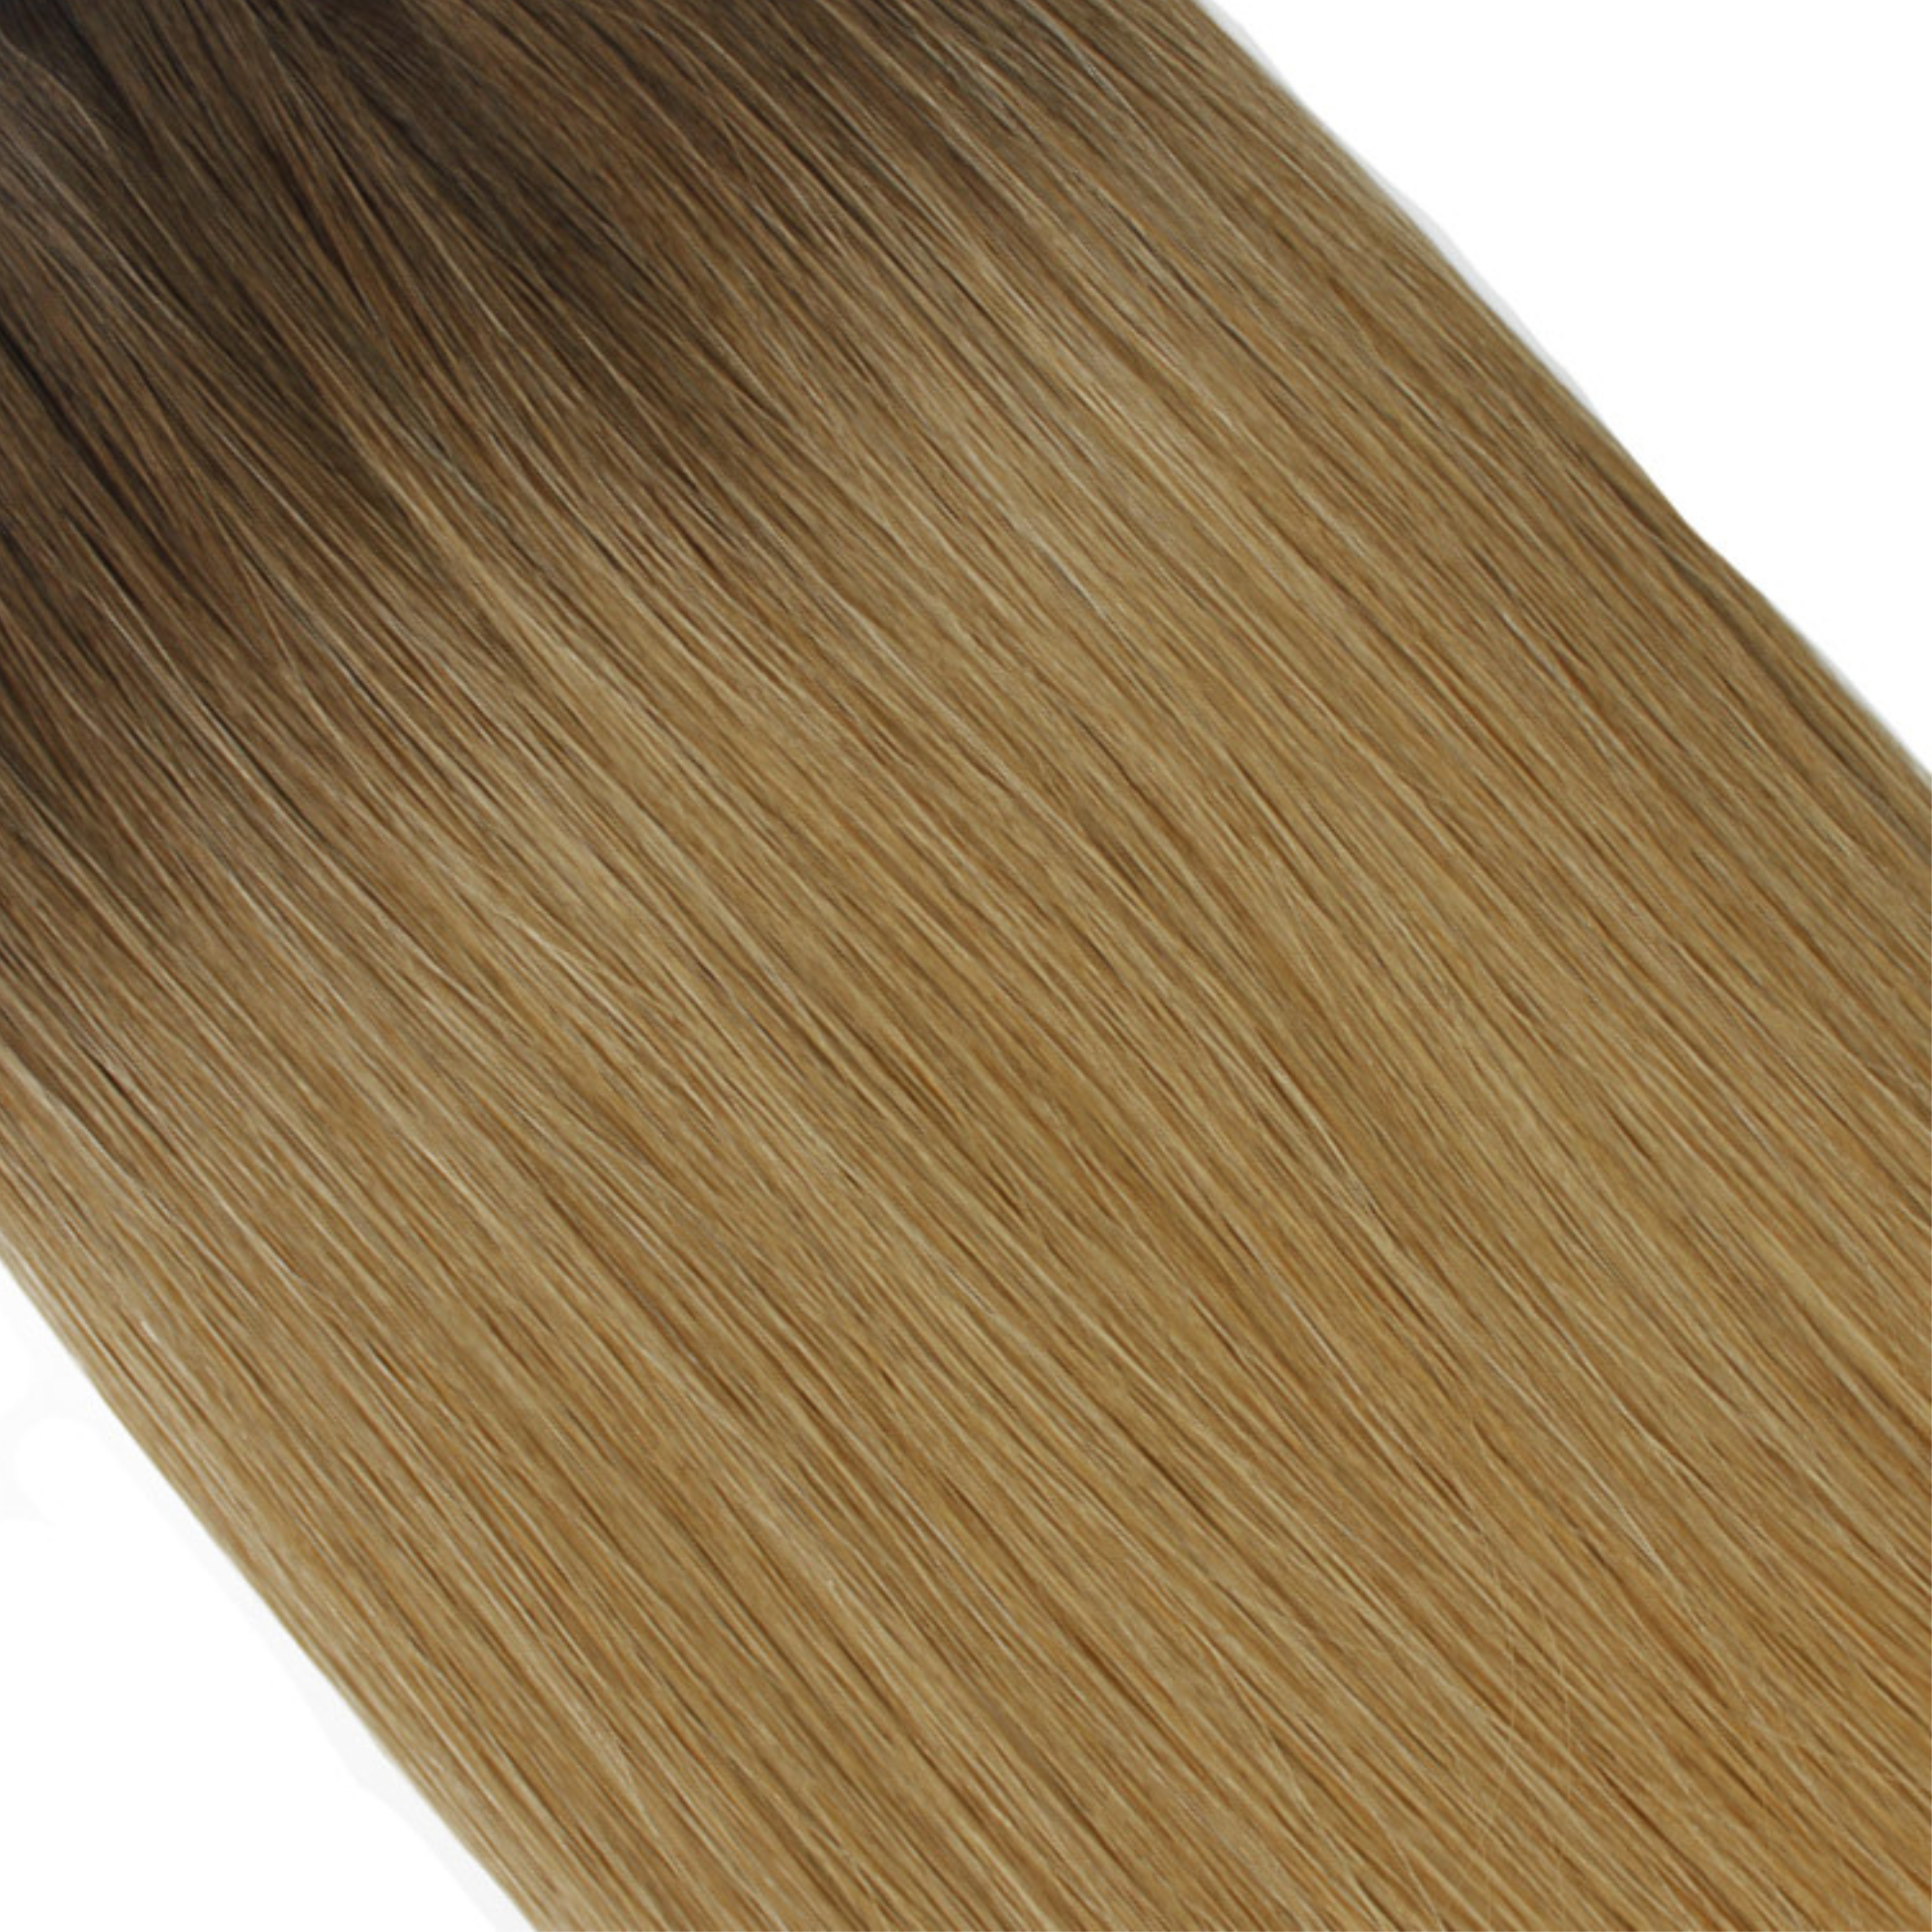 "hair rehab london 14" weft hair extensions shade swatch titled rooted boho"